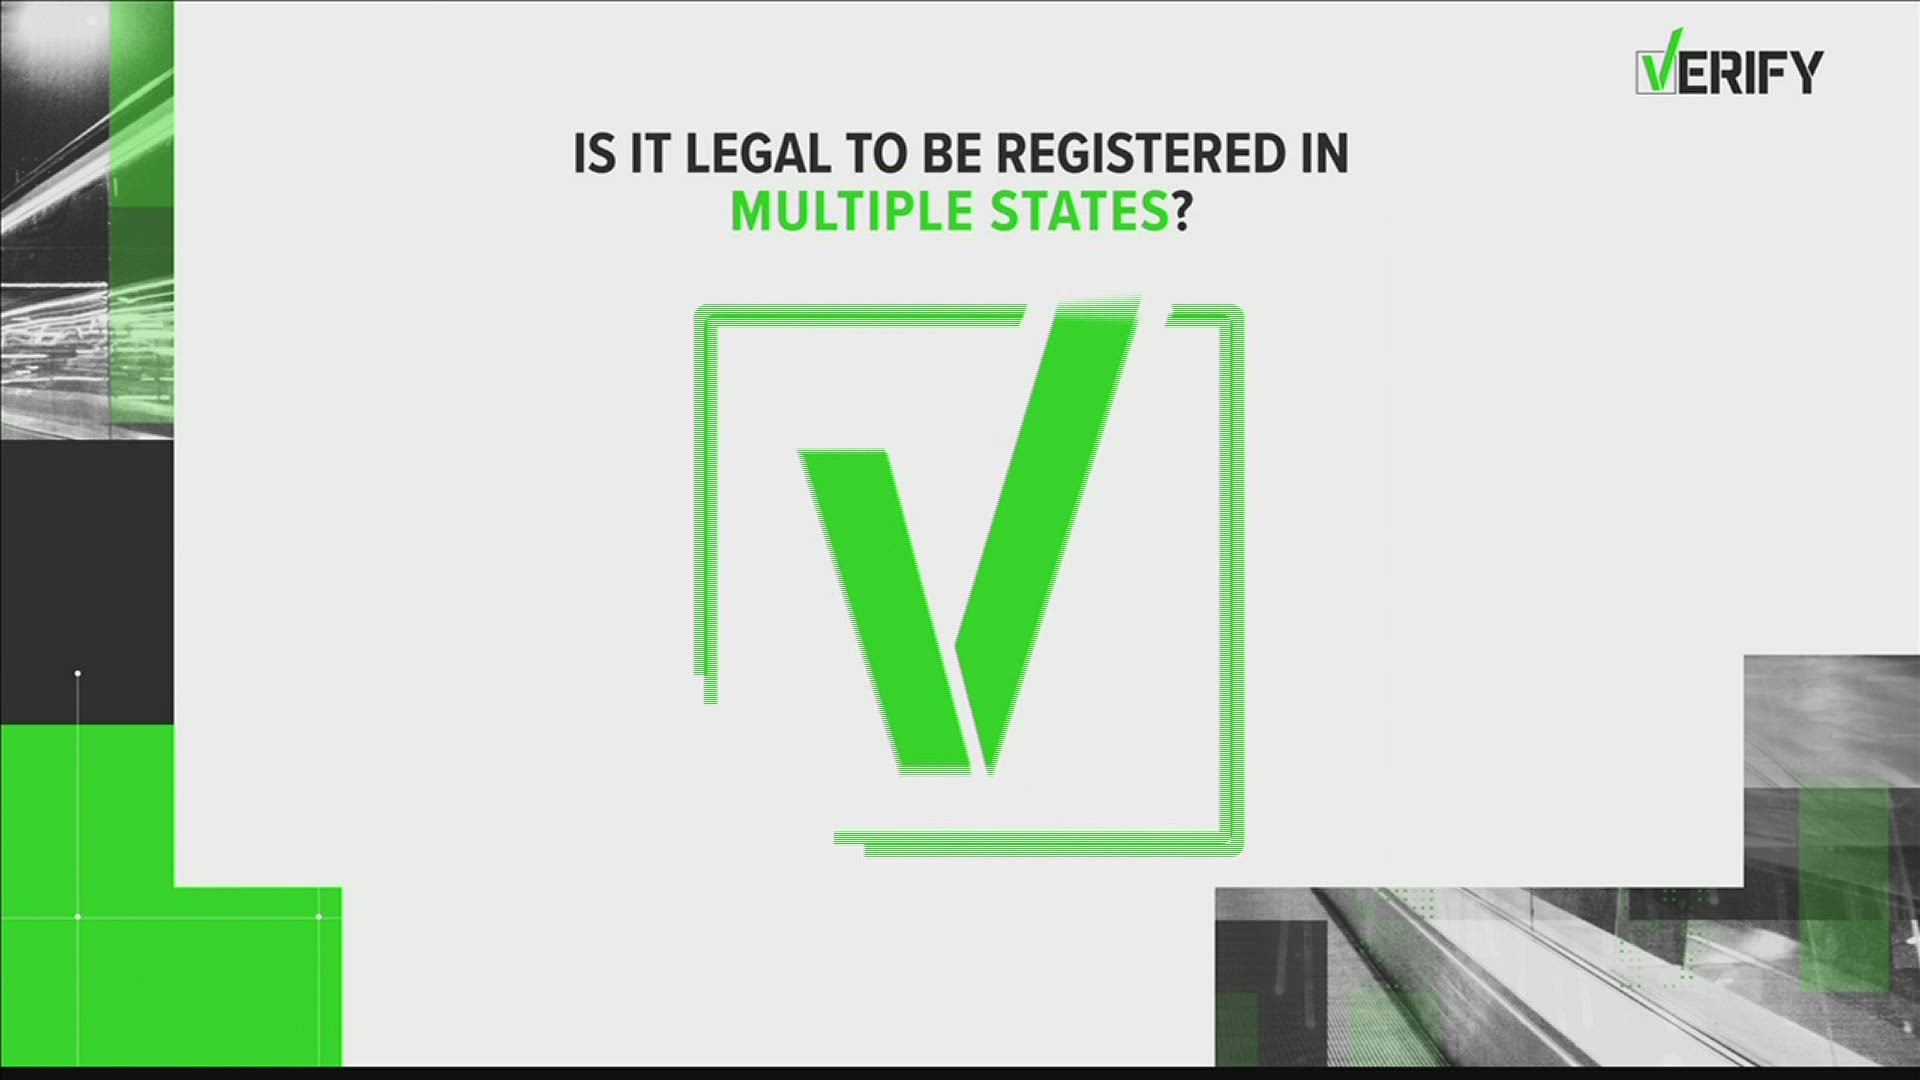 While it's legal to be registered in more than one state, you can only vote in one. Here's a breakdown.